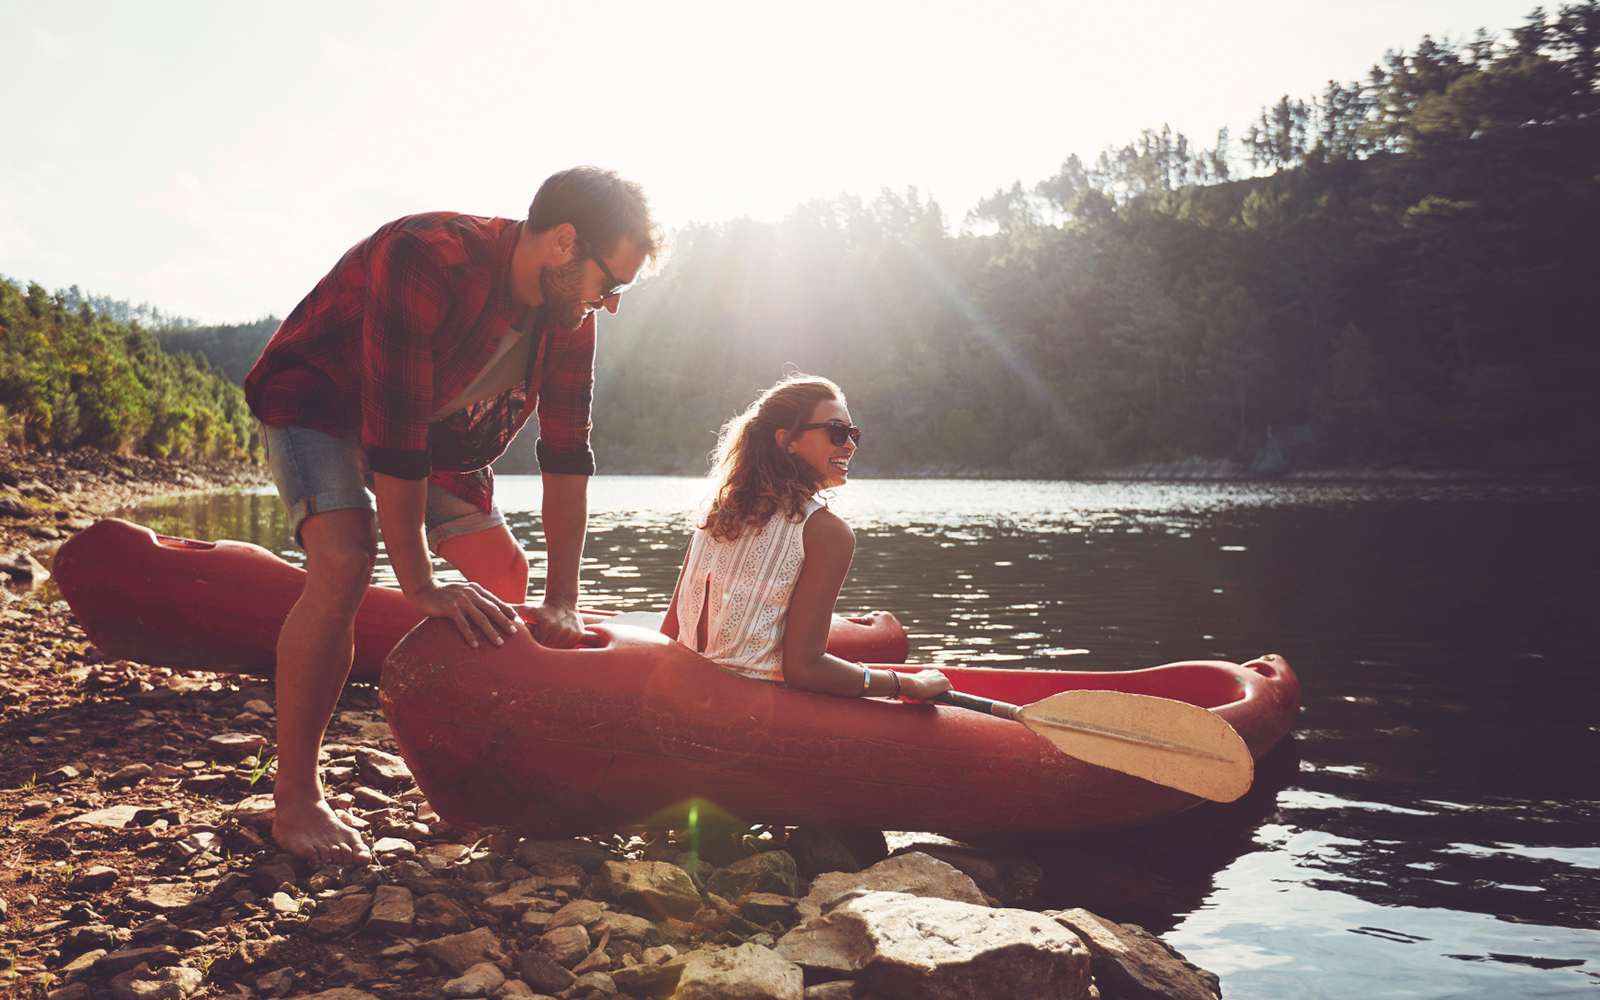 A man and woman in a canoe on the edge of water, practice water safety.